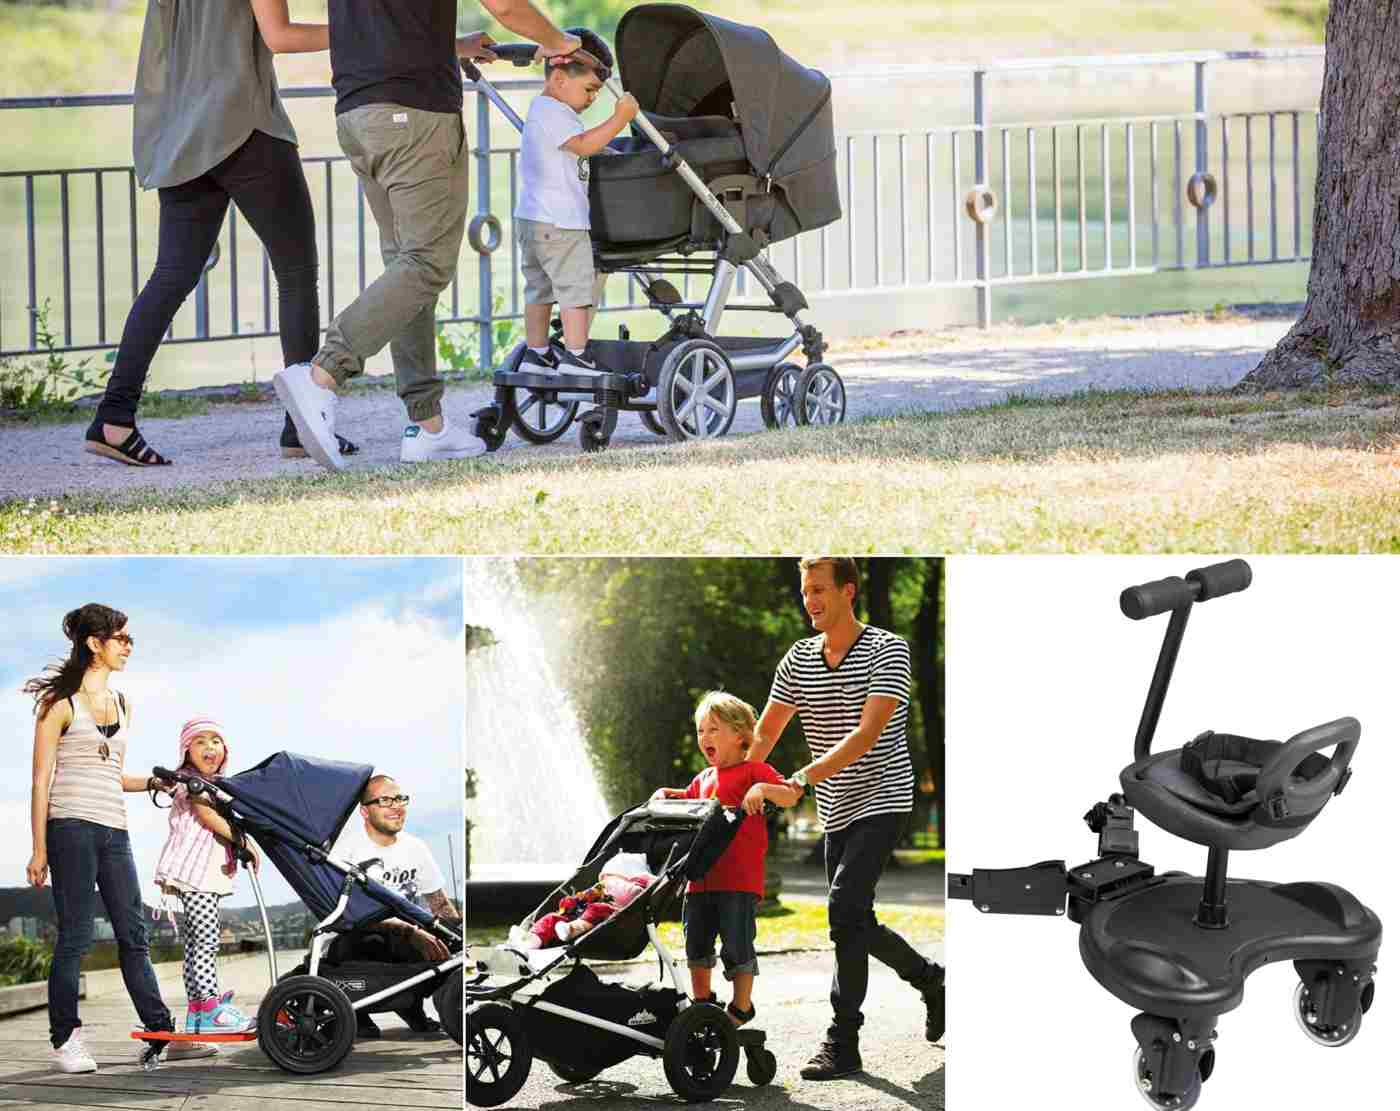 The Kiddy Board as a Pram Zubehör is suitable for children from 2 years